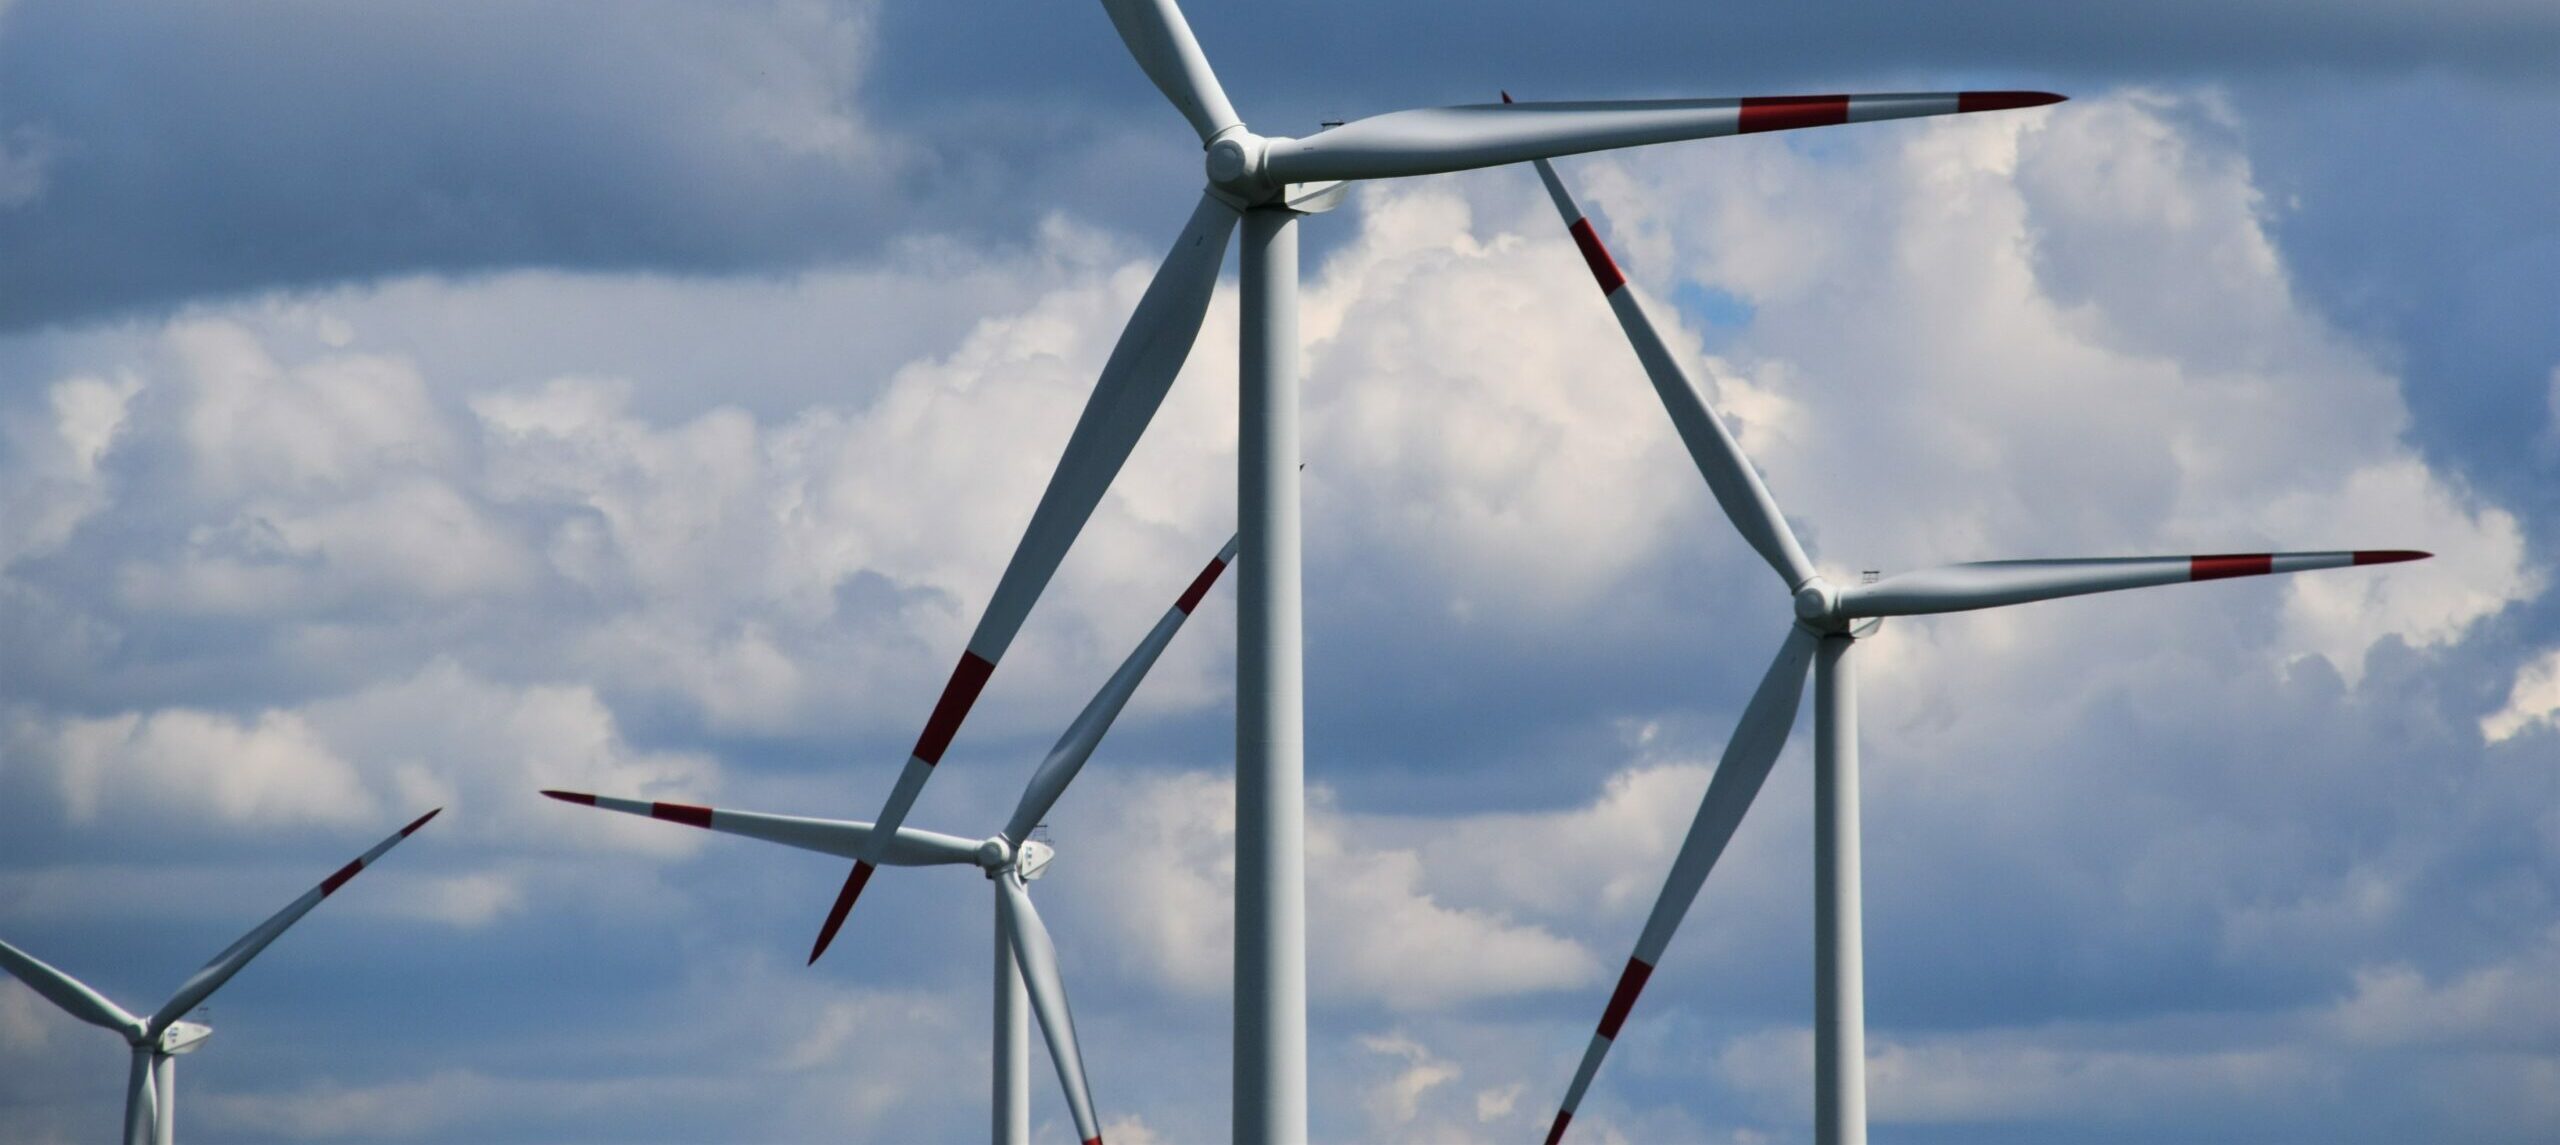 Canadian wind energy developers